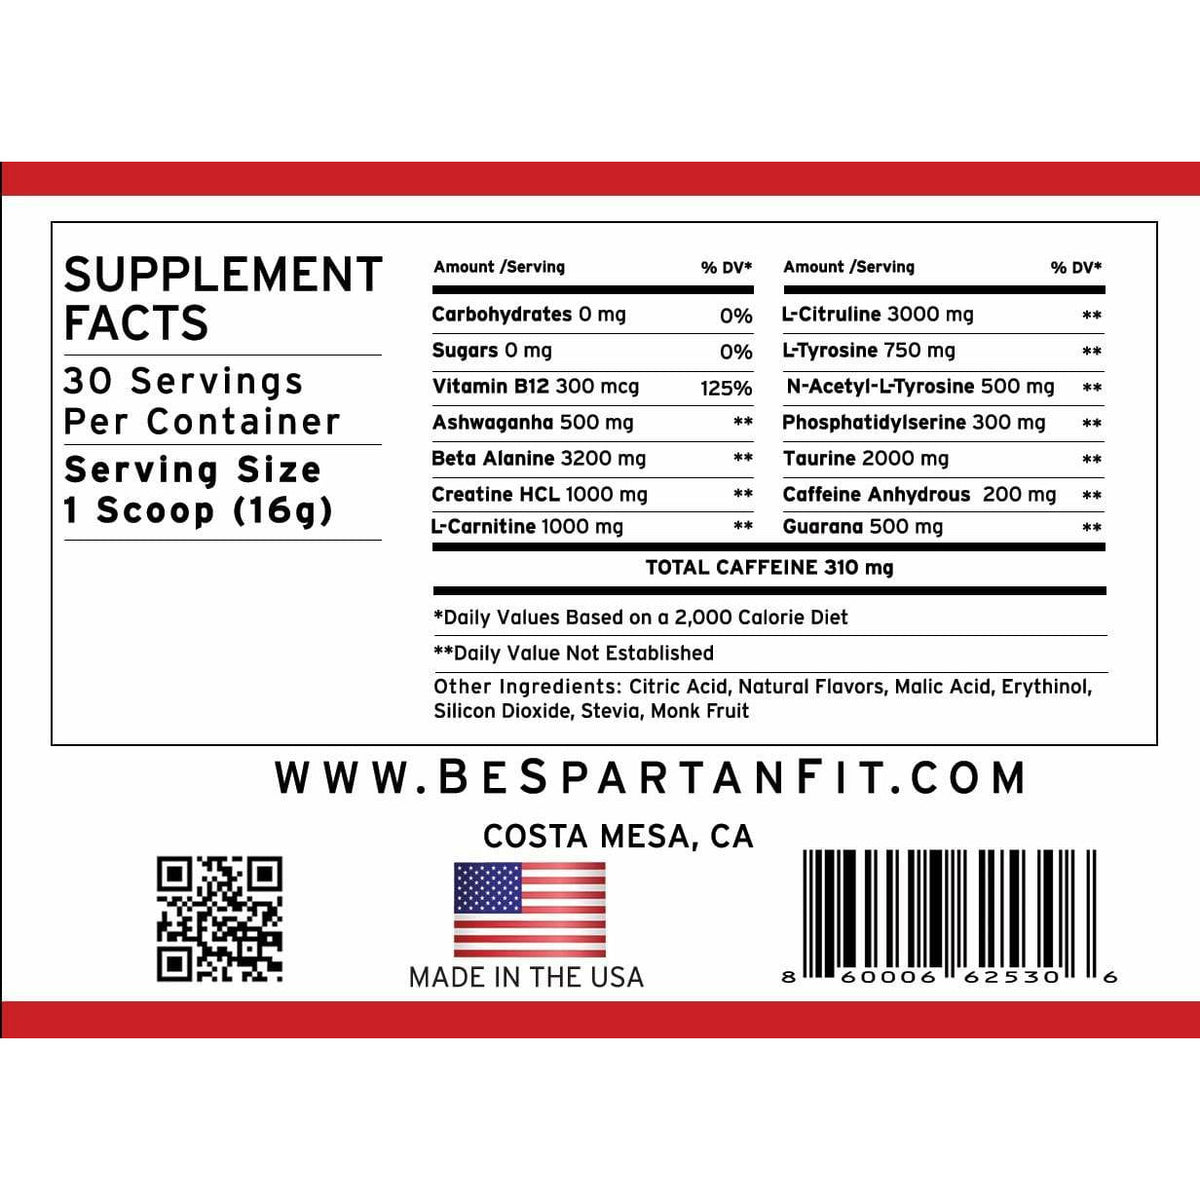 Spartan Fit Nutrition Supplement Spartan Fit Nutrition: The Leonidas Blend Pre-Workout | Regain Energy and Vitality for movement muscle mood and motivation